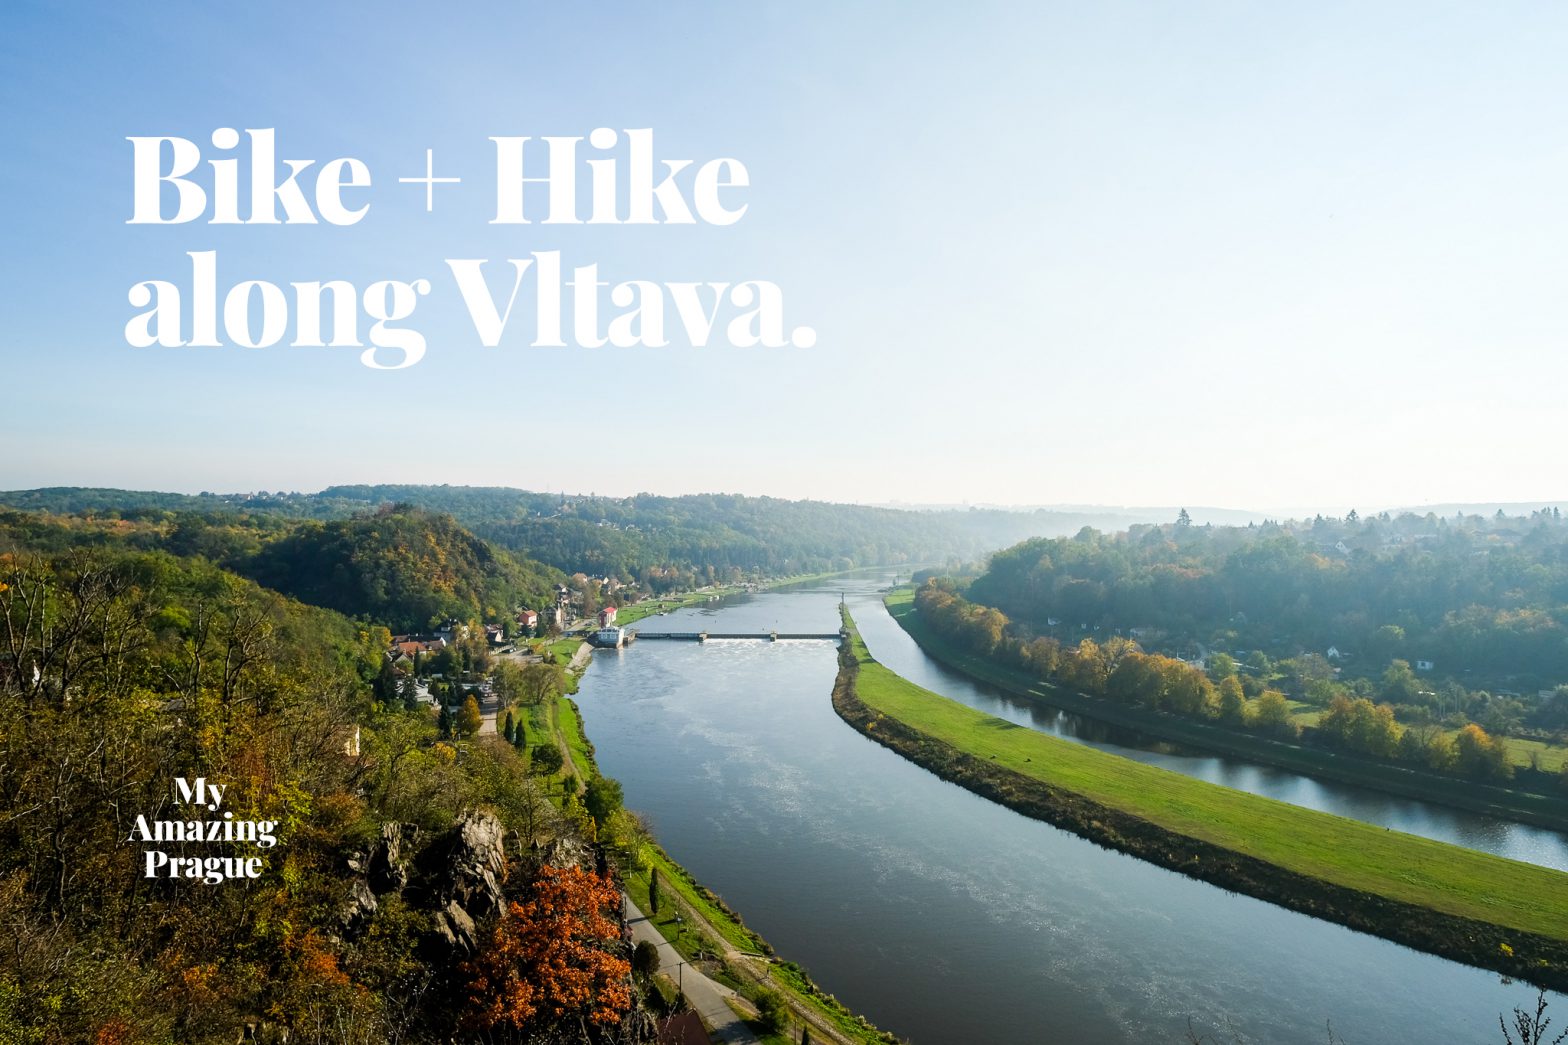 HIKE #2: Hiking along Vltava to its stunning views with support of bikes